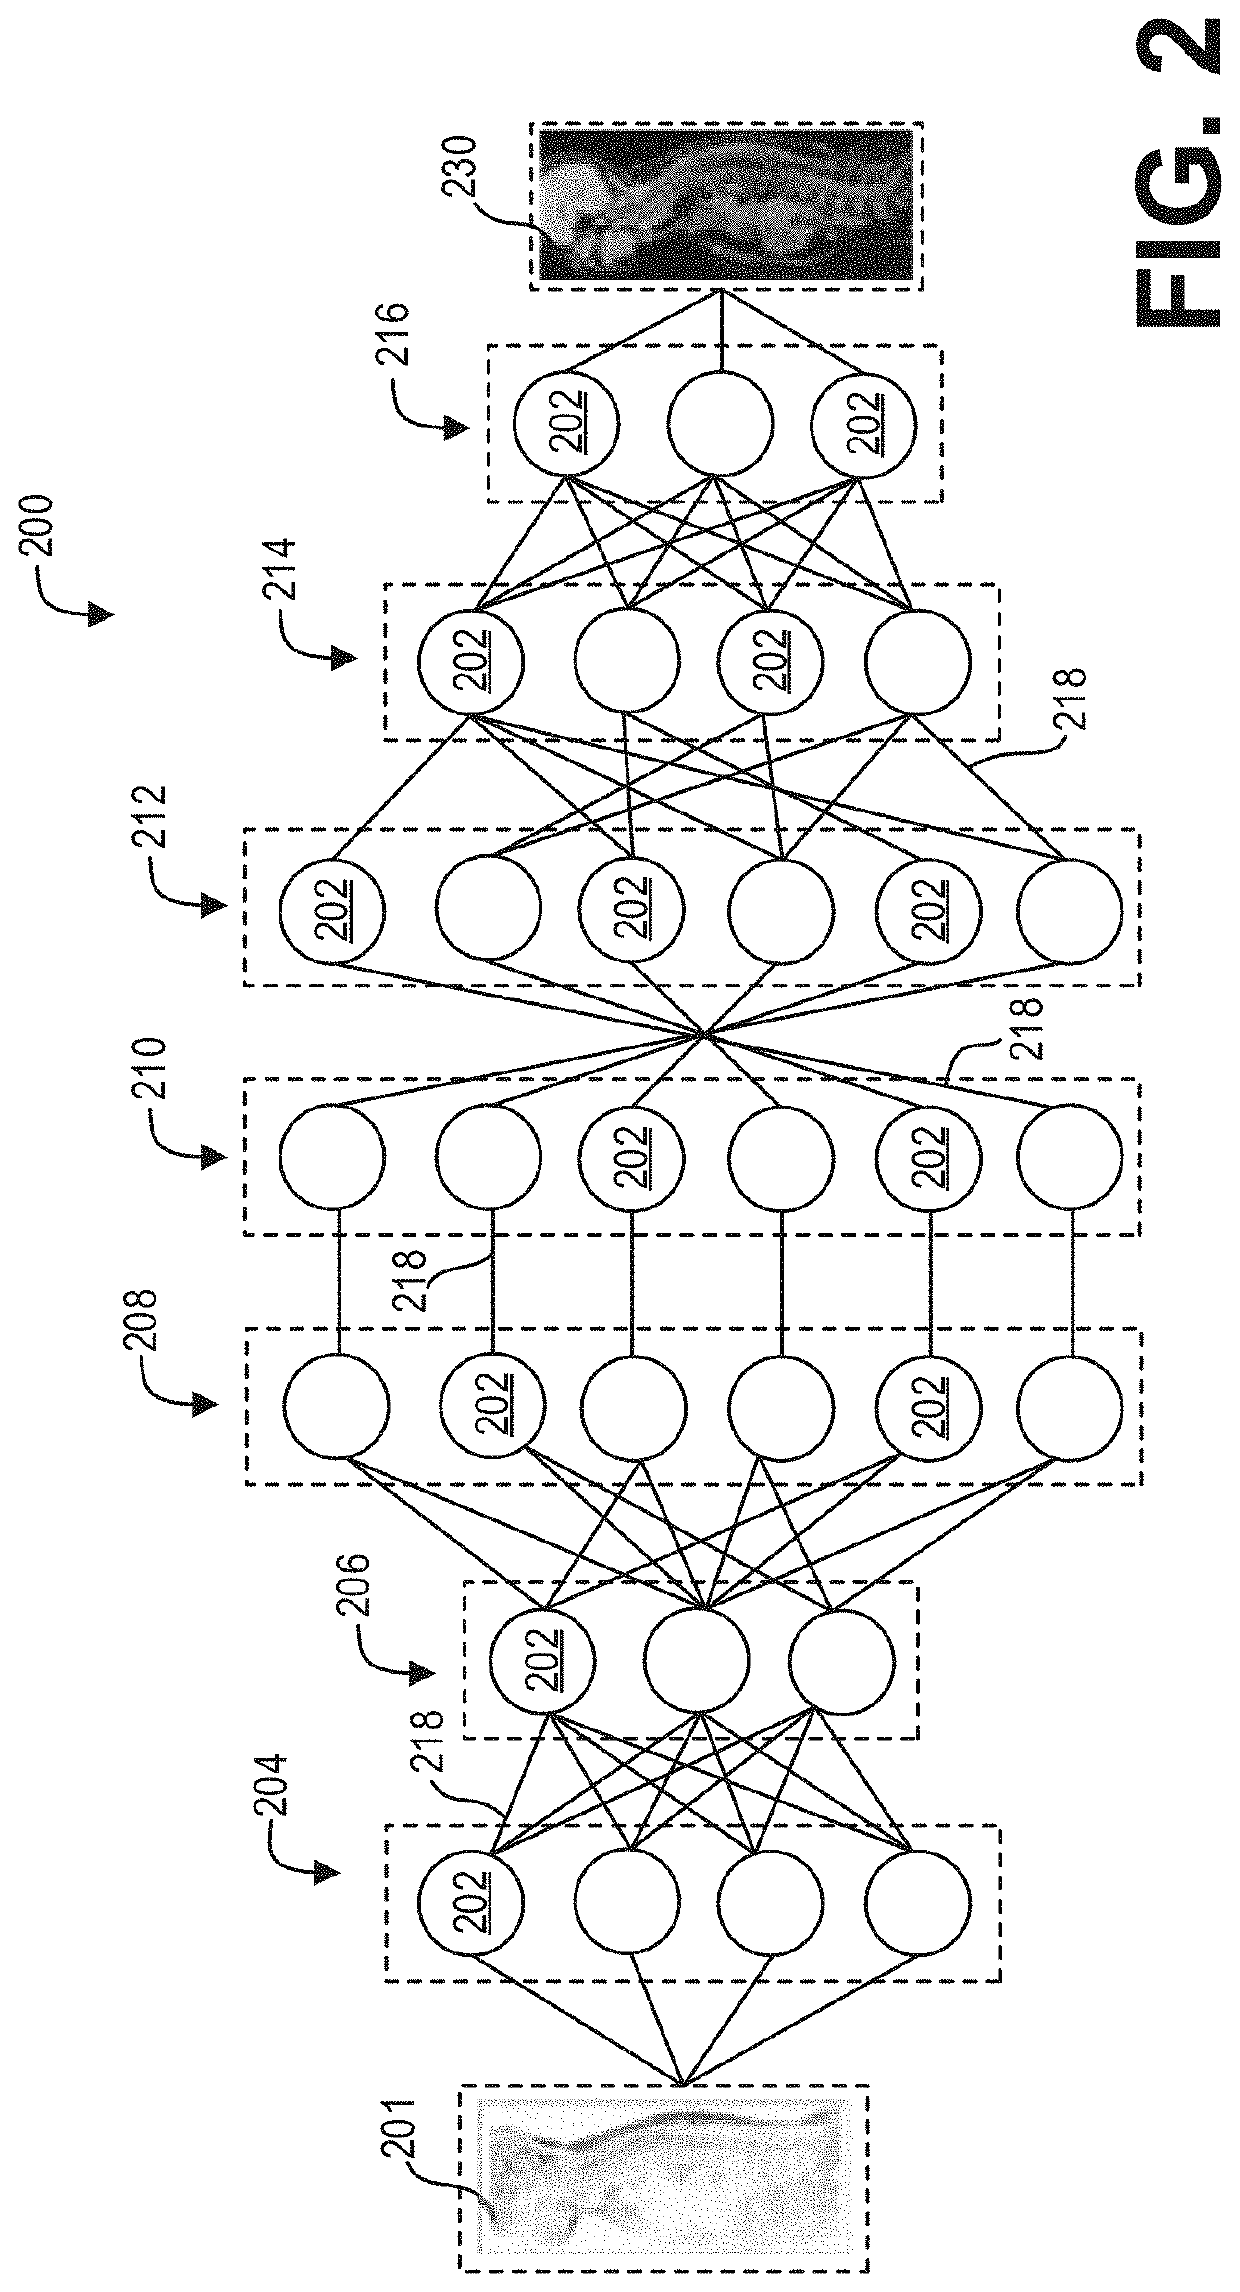 Systems and methods for deep learning based automated spine registration and label propagation